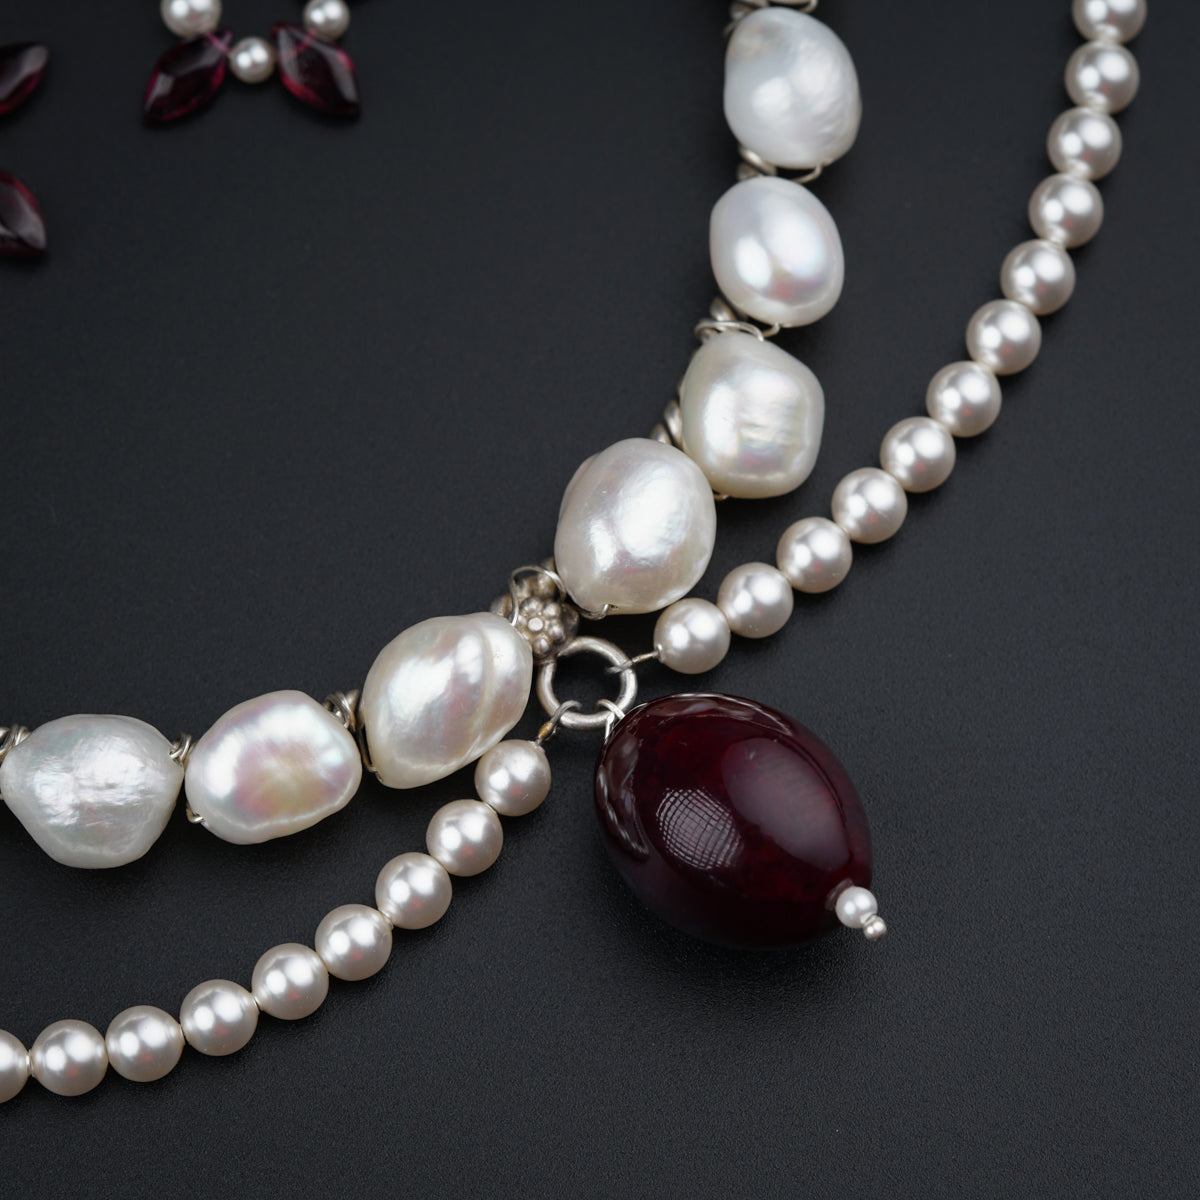 a necklace with pearls and a red stone